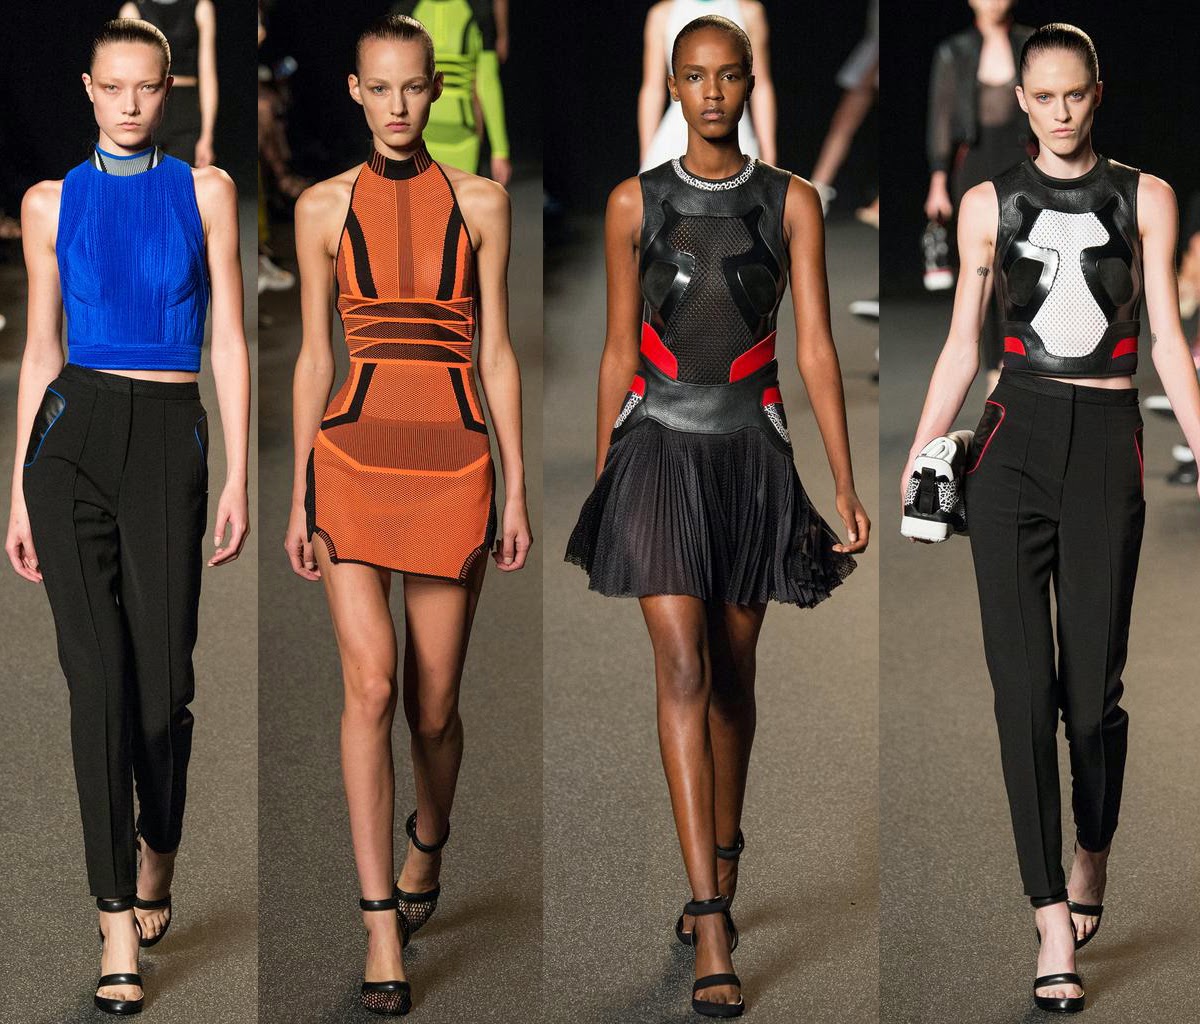 Alexander wang, new york fashion week, nyfw, sports luxe, sporty chic, colour palette, ss15, spring summer, 2015, womens clothing, fashion, fashion blog, fashion blogger, lesimplyclassy, le simply classy, samira hoque, fashion review, nicki minaj, rihanna, die antwoord, front row, fashion show, celebrities, models, runway, alexander wang bags, alexander wang shoes, alexander wang sale, t by alexander wang, alexander wang replica, alexander wang dress, alexander wang die antwoord, alexander wang emile, aila wang, alexander wang fashion show, alexander wang catwalk show, 2014,  alexander wang runway, cathy horyn alexander wang, alexander wang runway show, alexander wang spring summer 2012, nyfw fashion, nyfw spring 2014 schedule, nyfw street style, nyfw ss14, nyfw september 2013, instagram